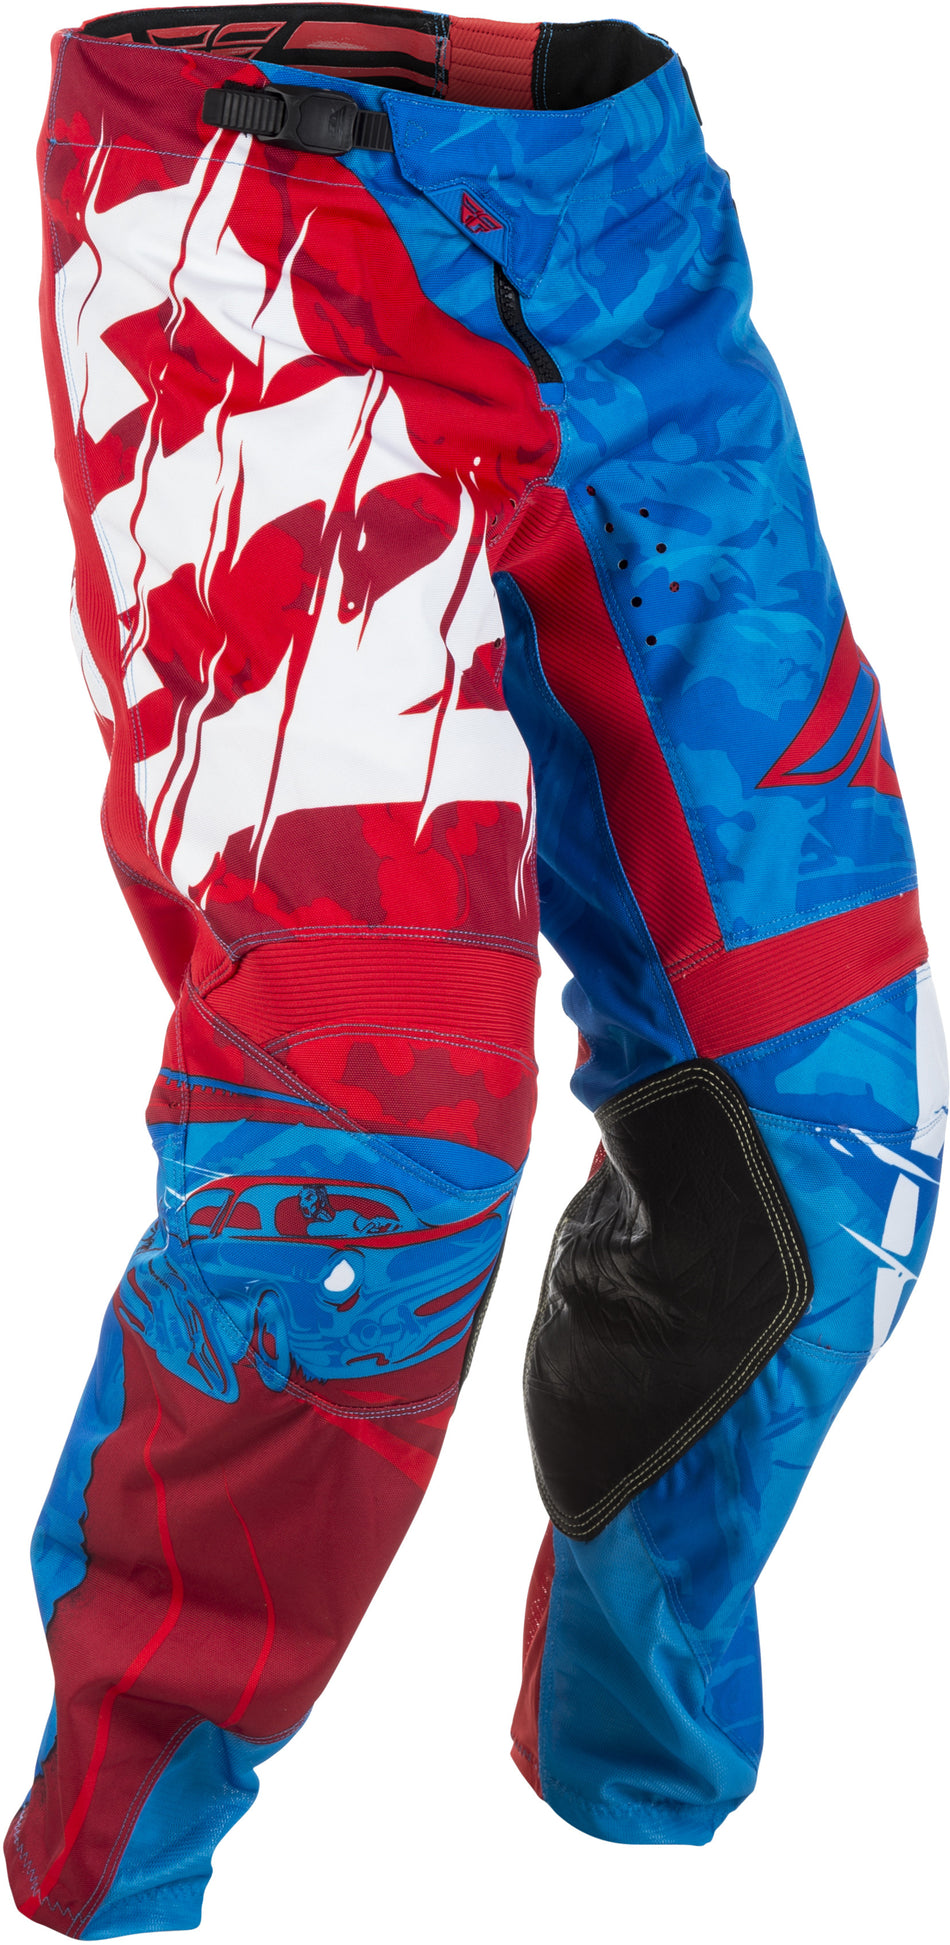 FLY RACING Kinetic Outlaw Pants Red/Blue Sz 20 371-53220